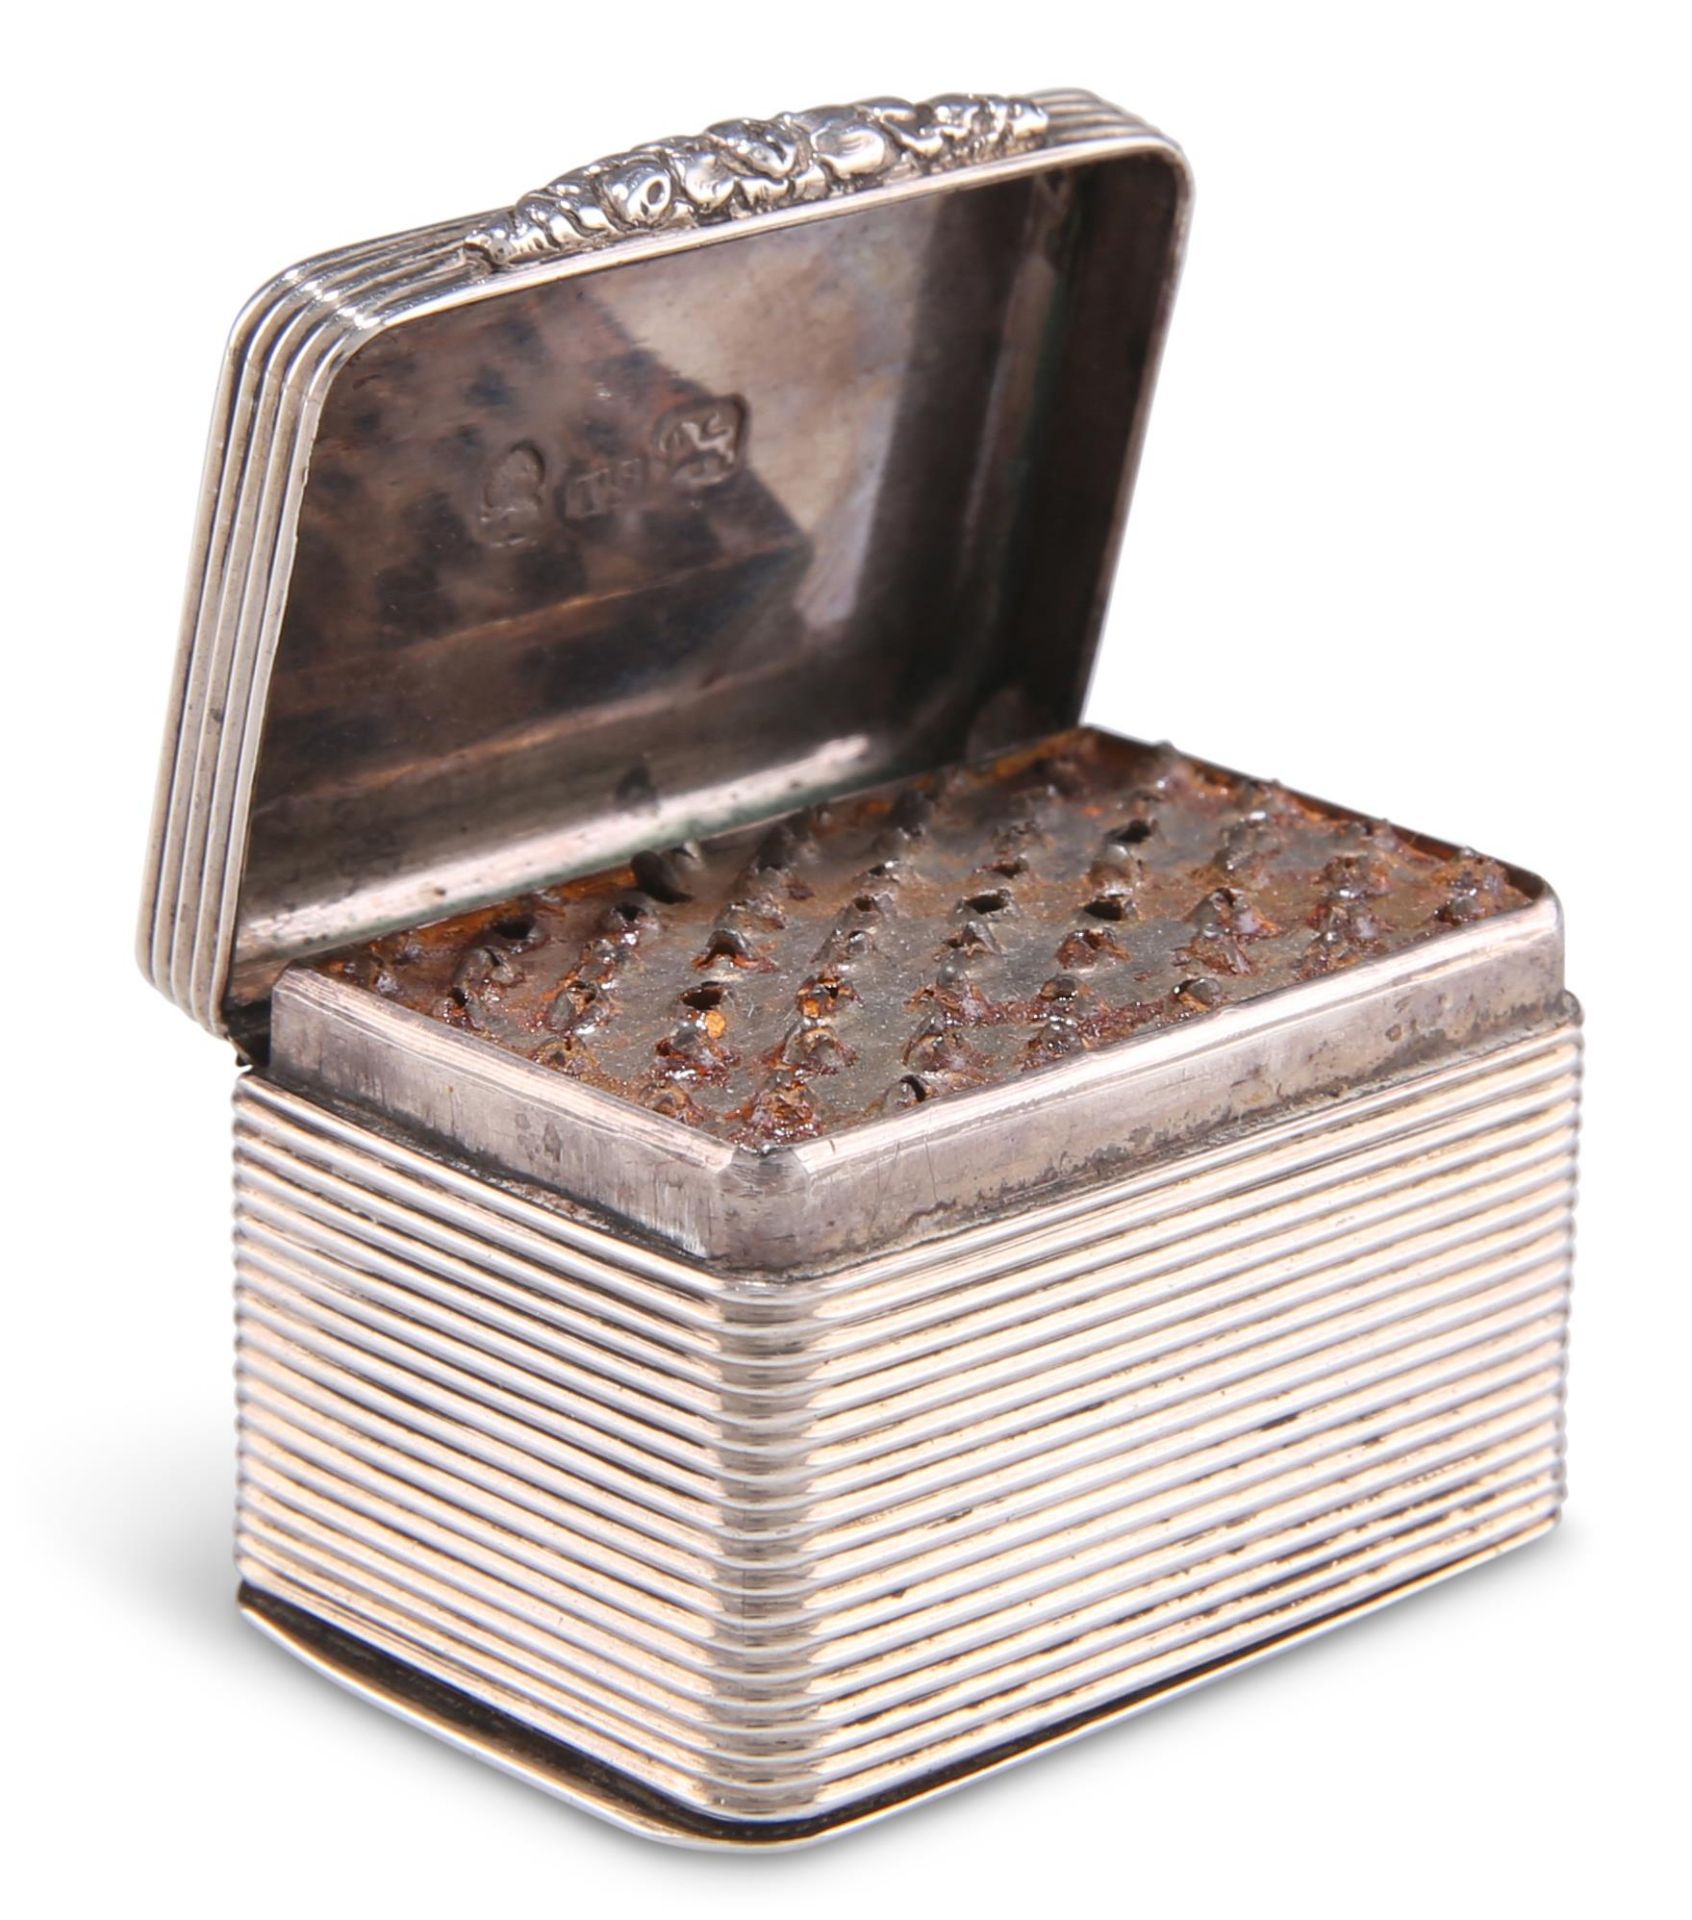 A GEORGE IV SILVER NUTMEG GRATER